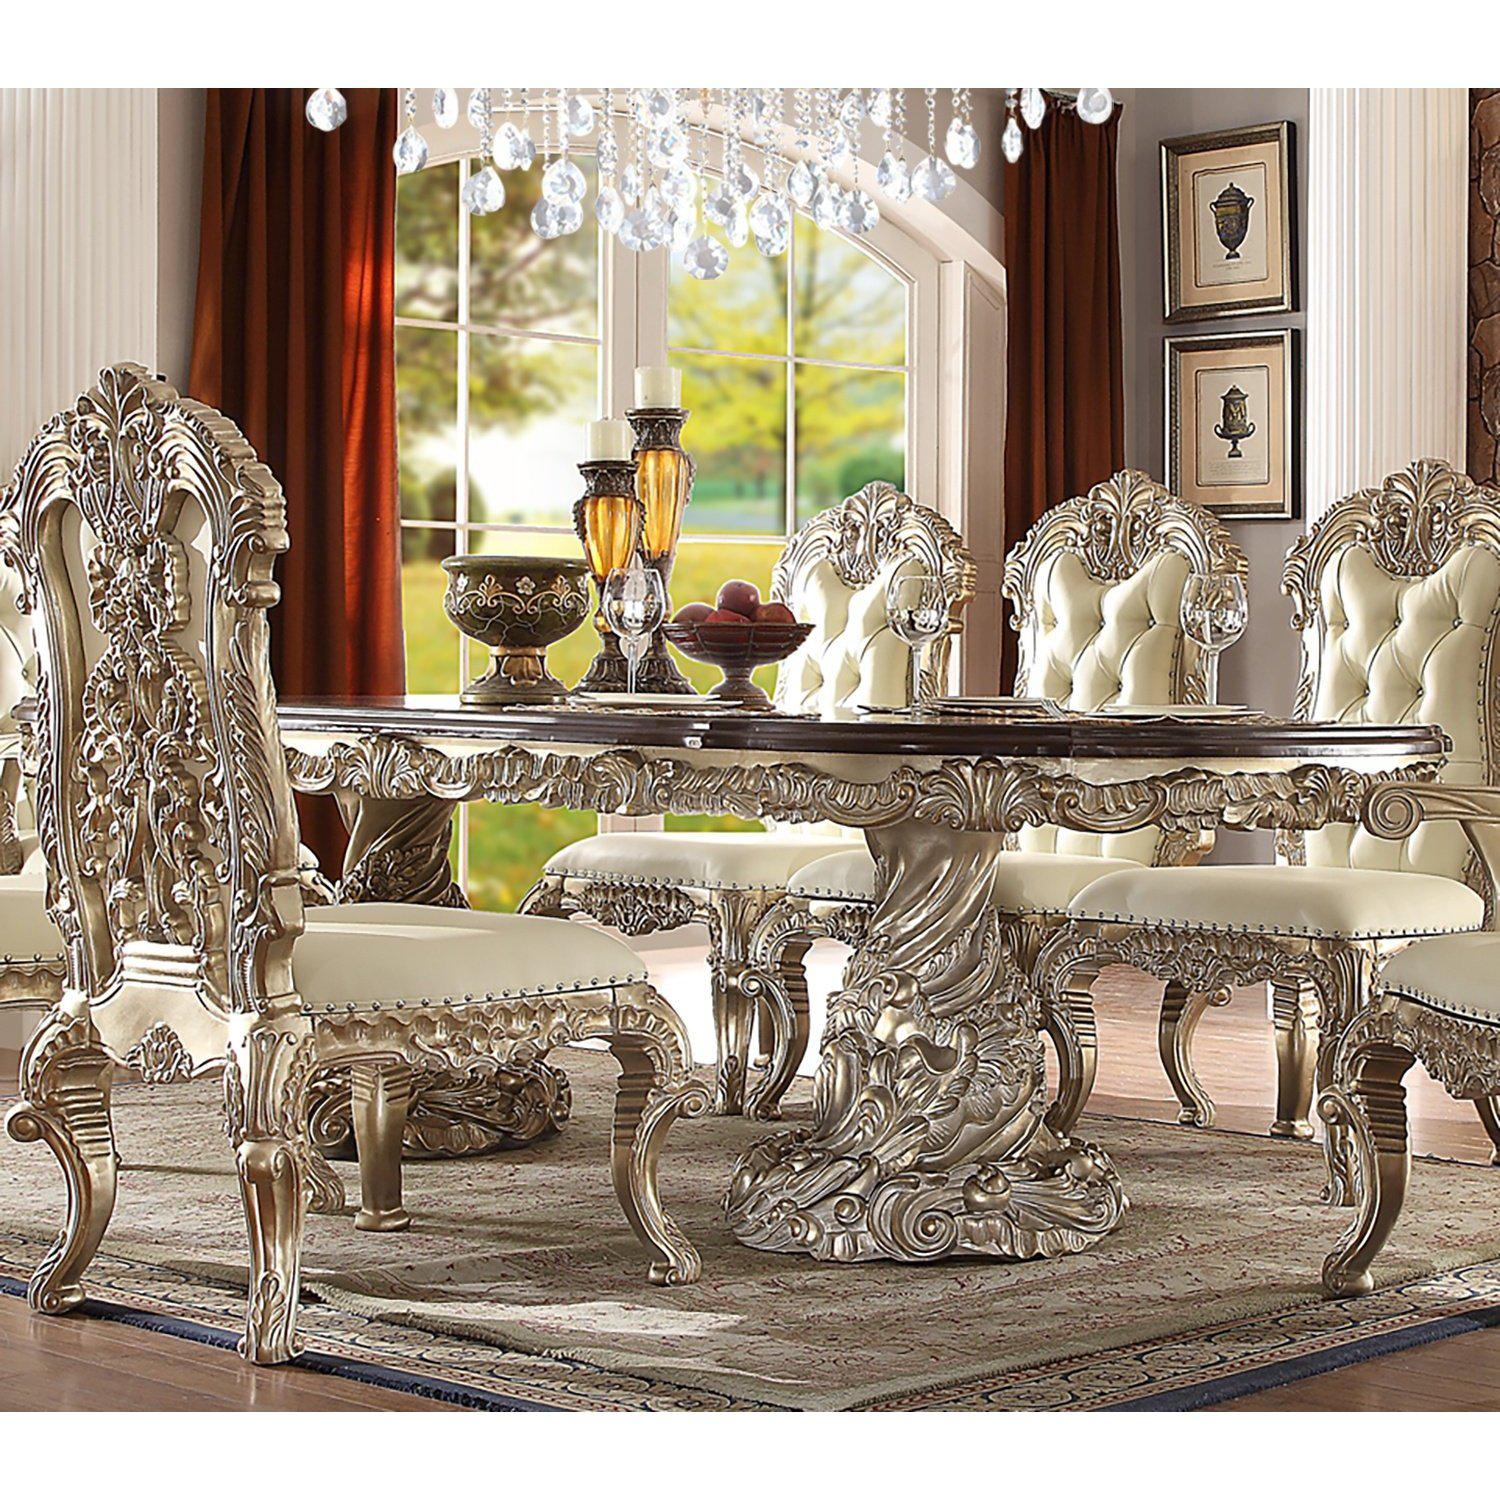 Homey Design Luxury Hd-8017 - 9Pc Dining Table Set-Iron Home Concepts